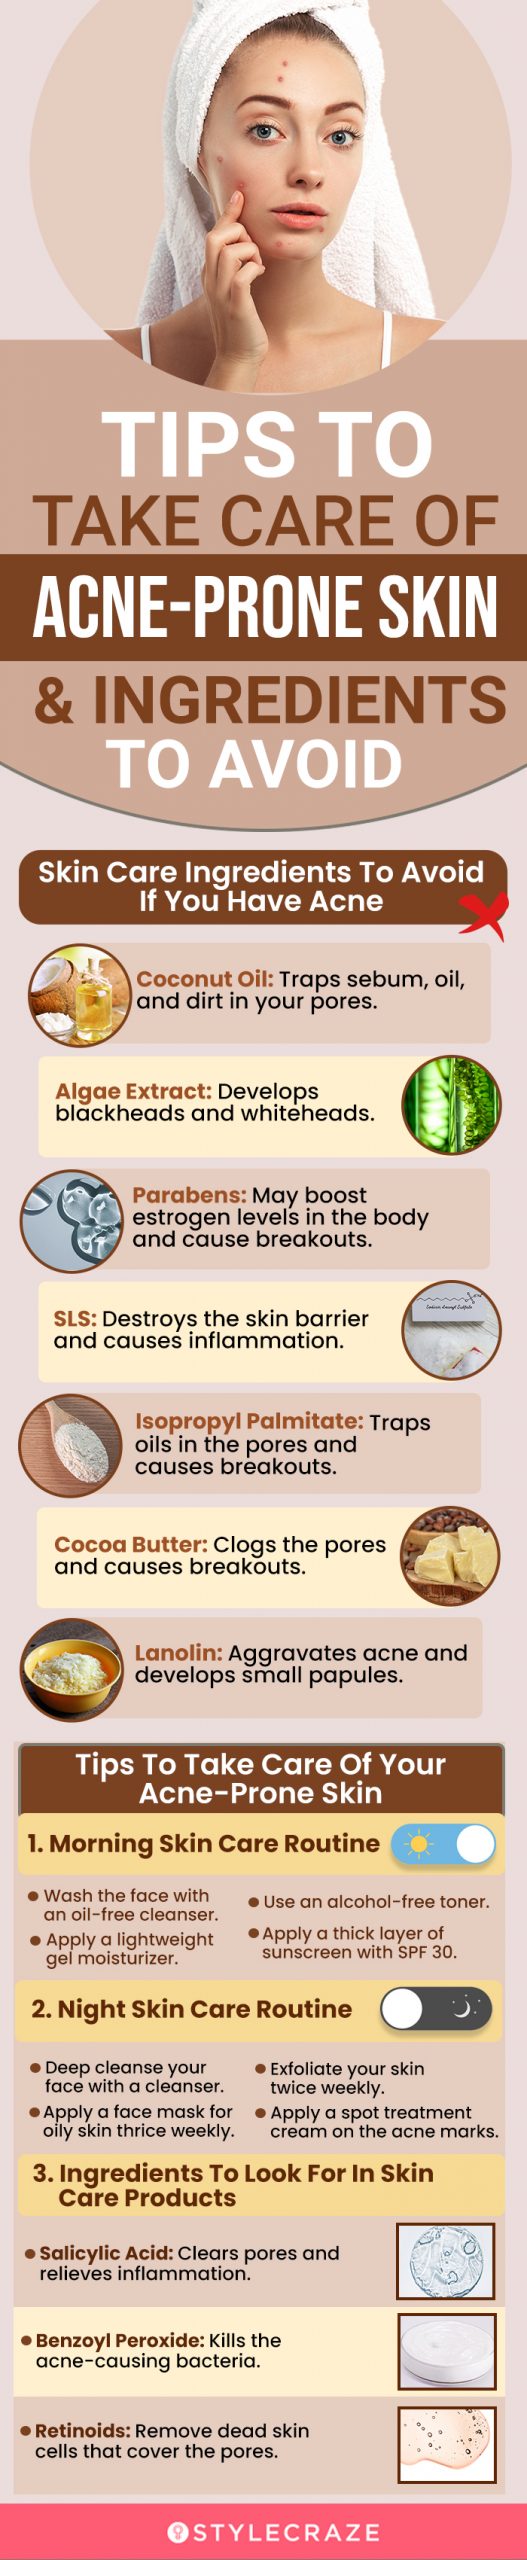 Tips To Take Care Of Acne-Prone Skin (infographic)